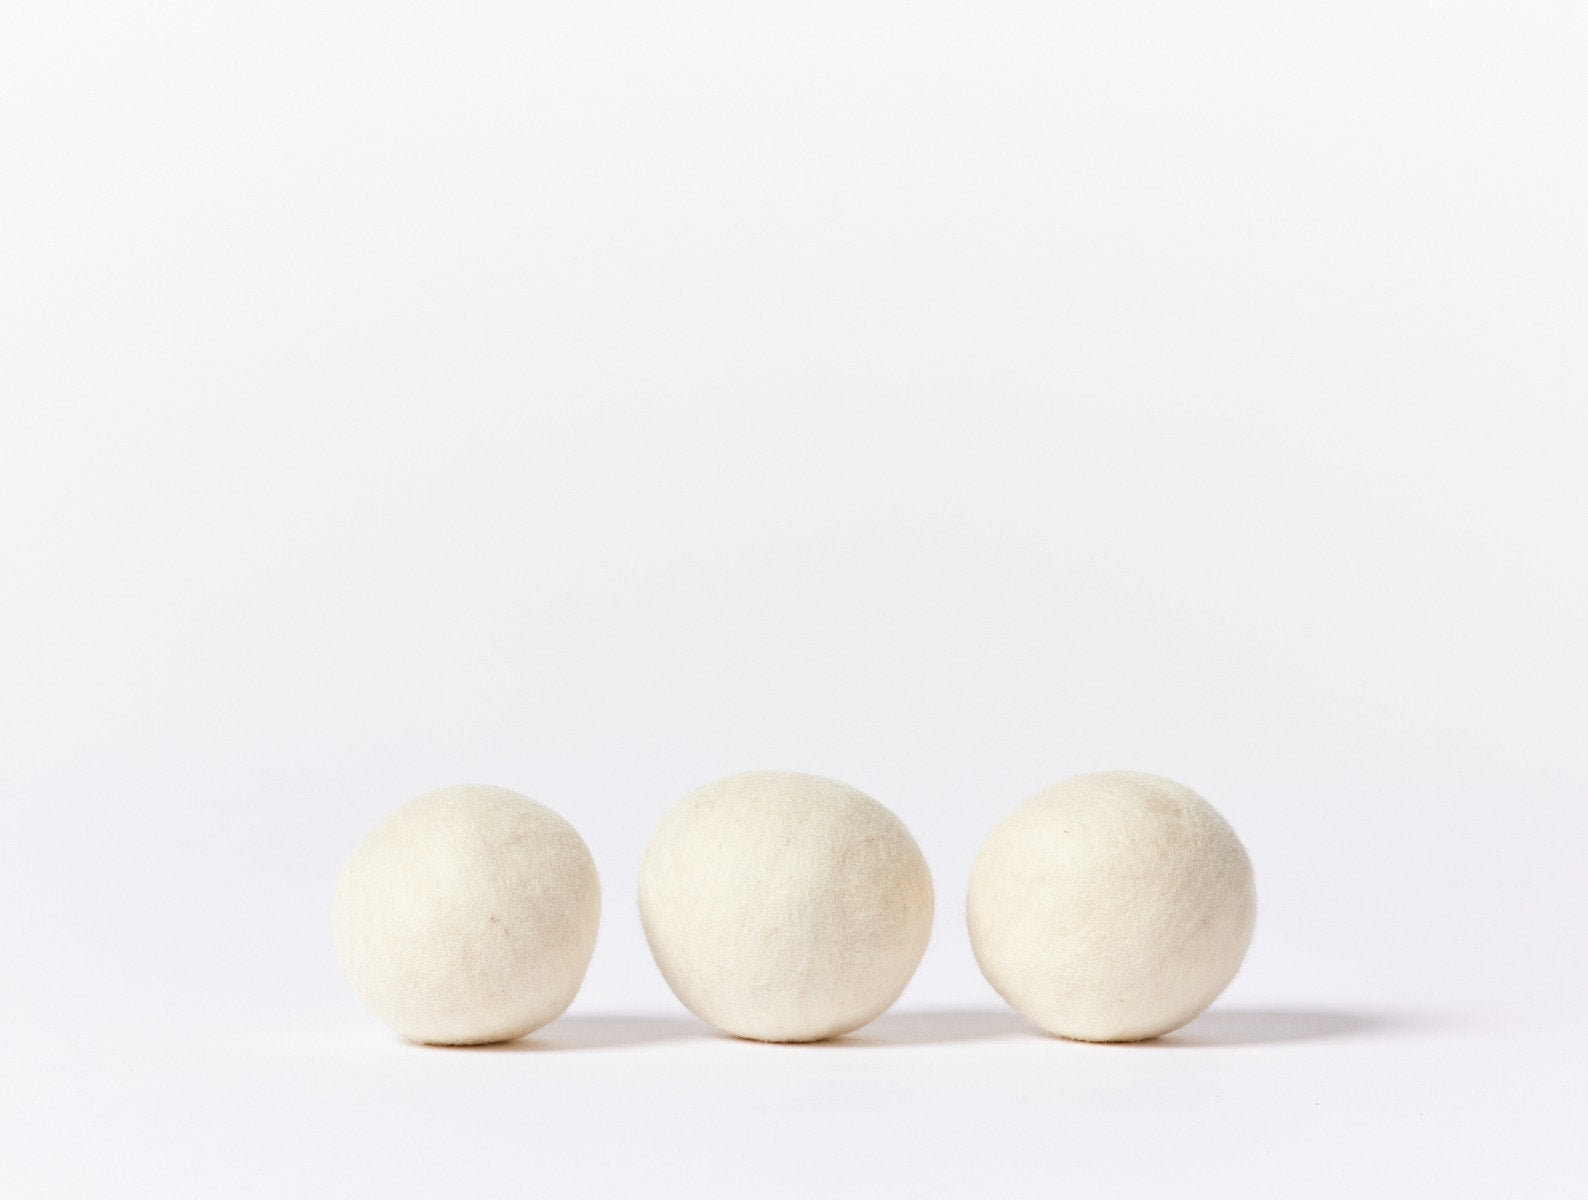 Climate Beneficial™ Wool Dryer Balls – Coyuchi